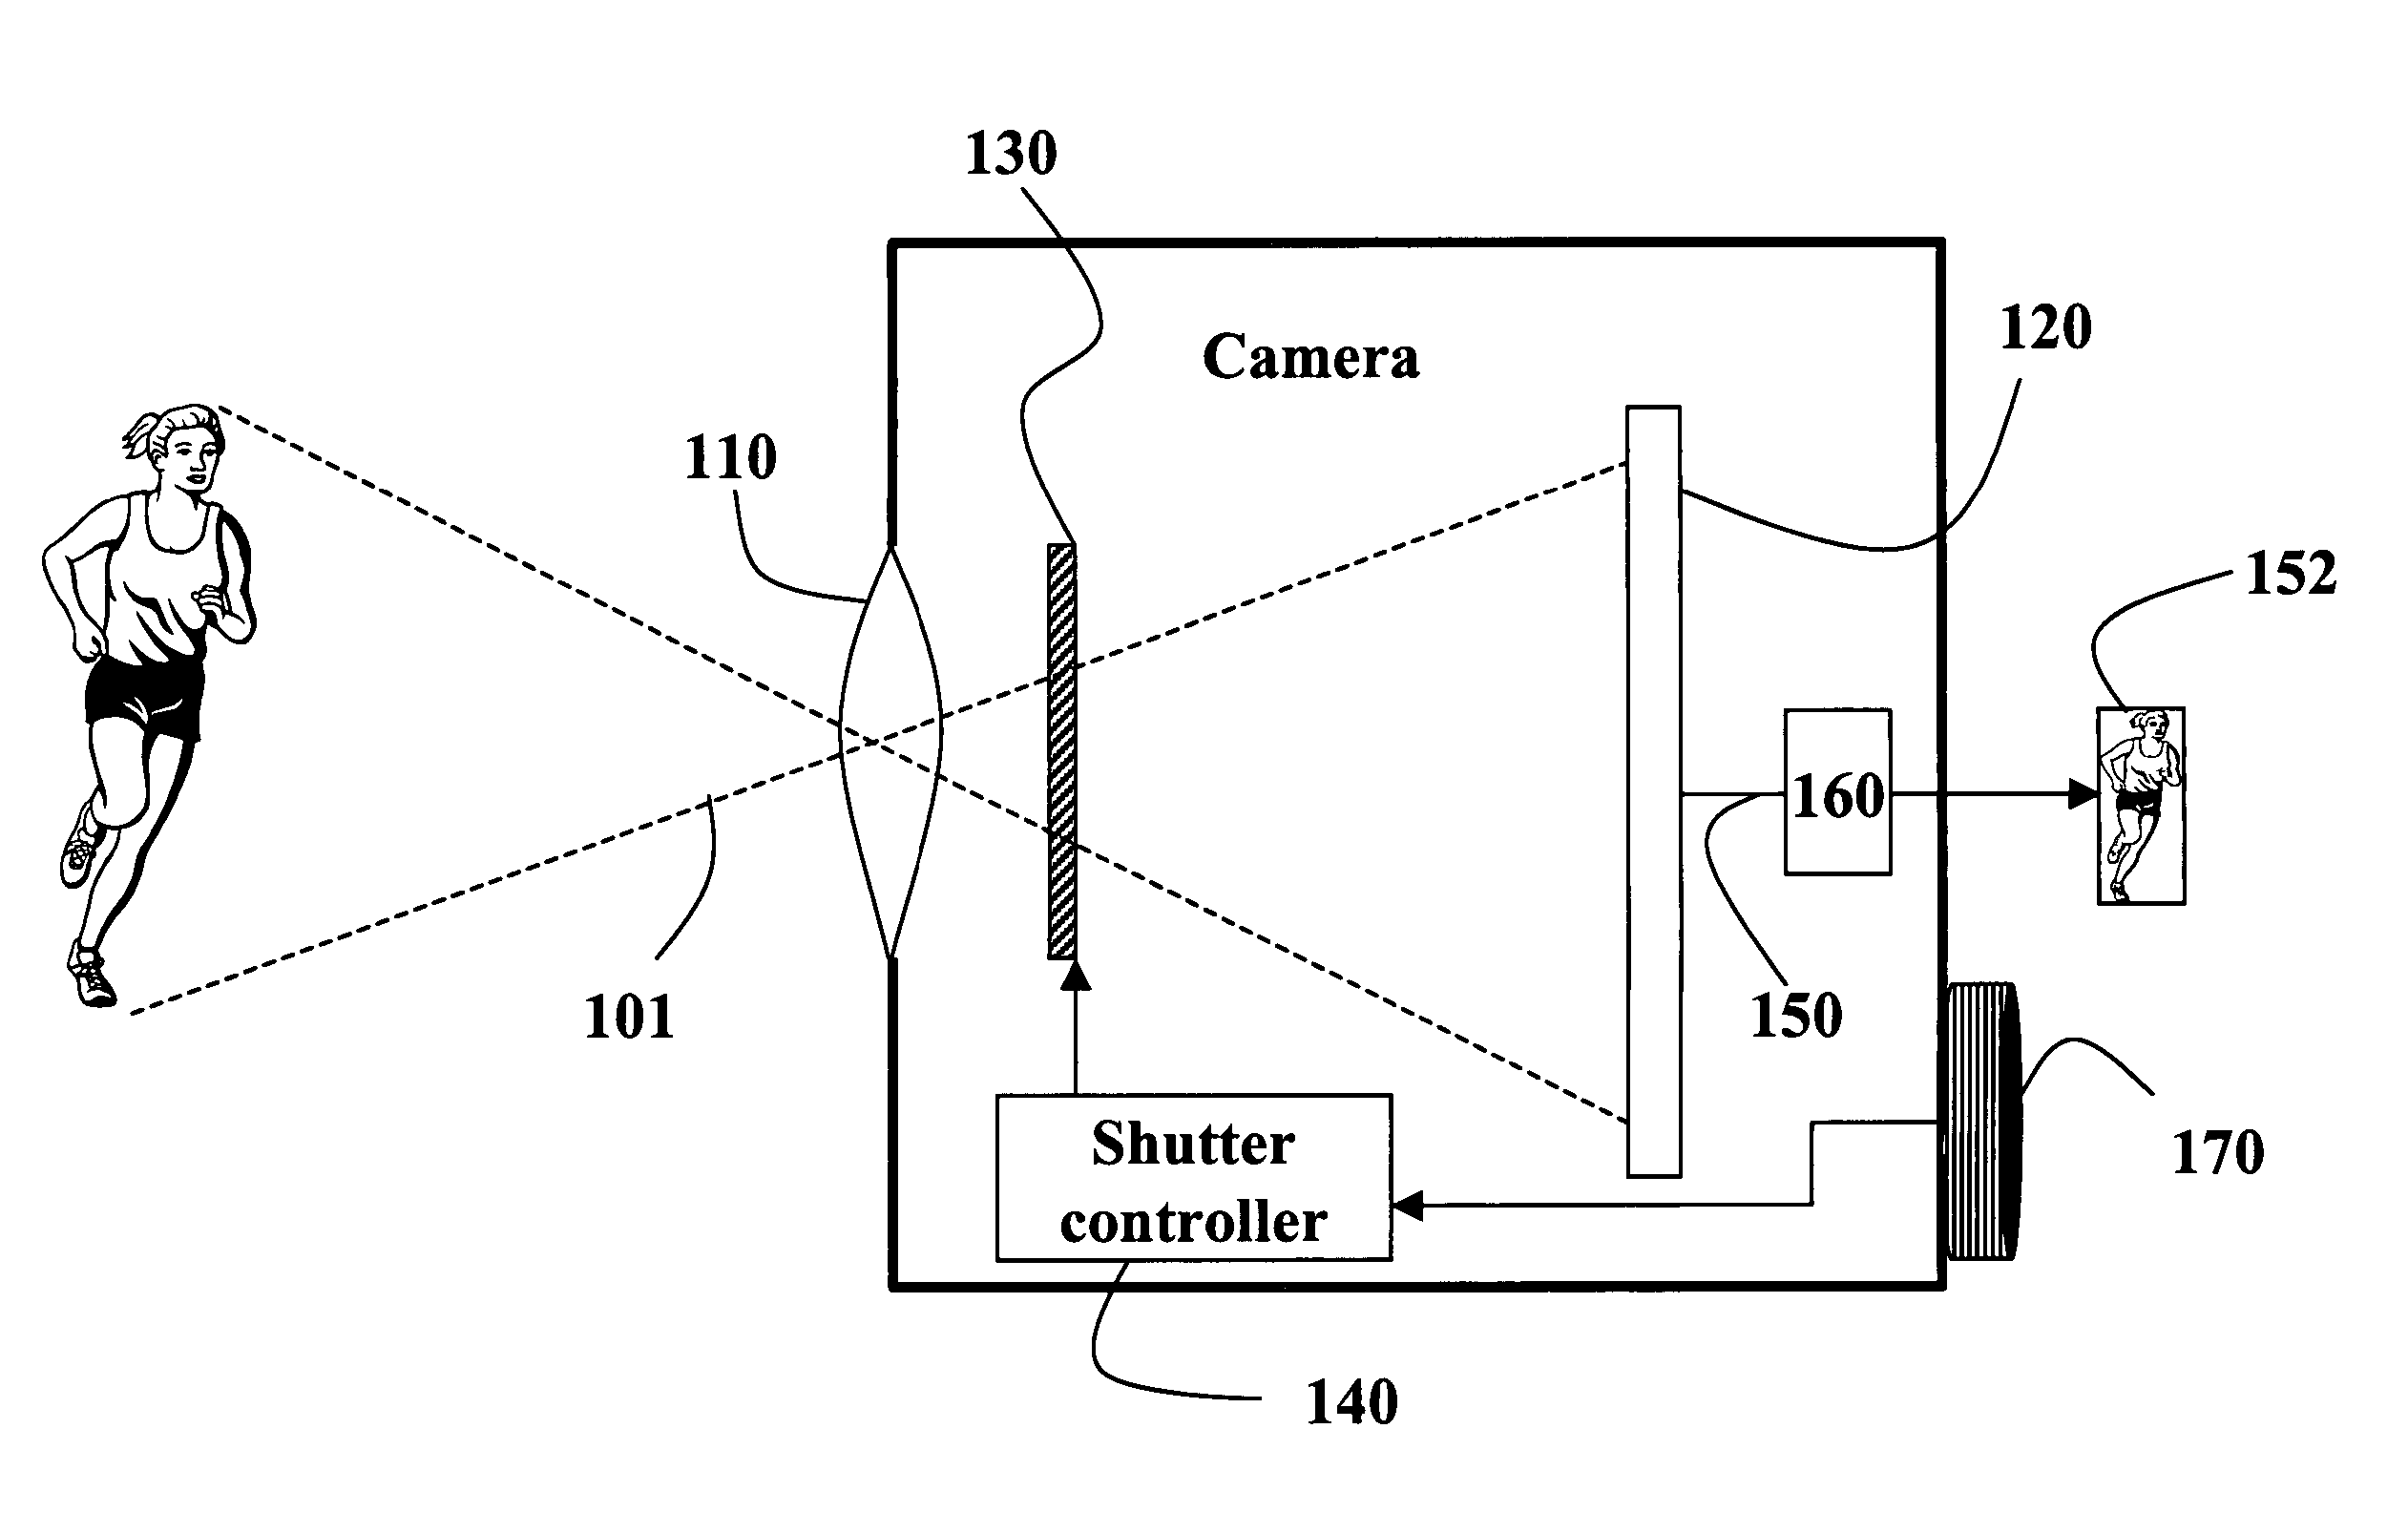 Method for deblurring images using optimized temporal coding patterns